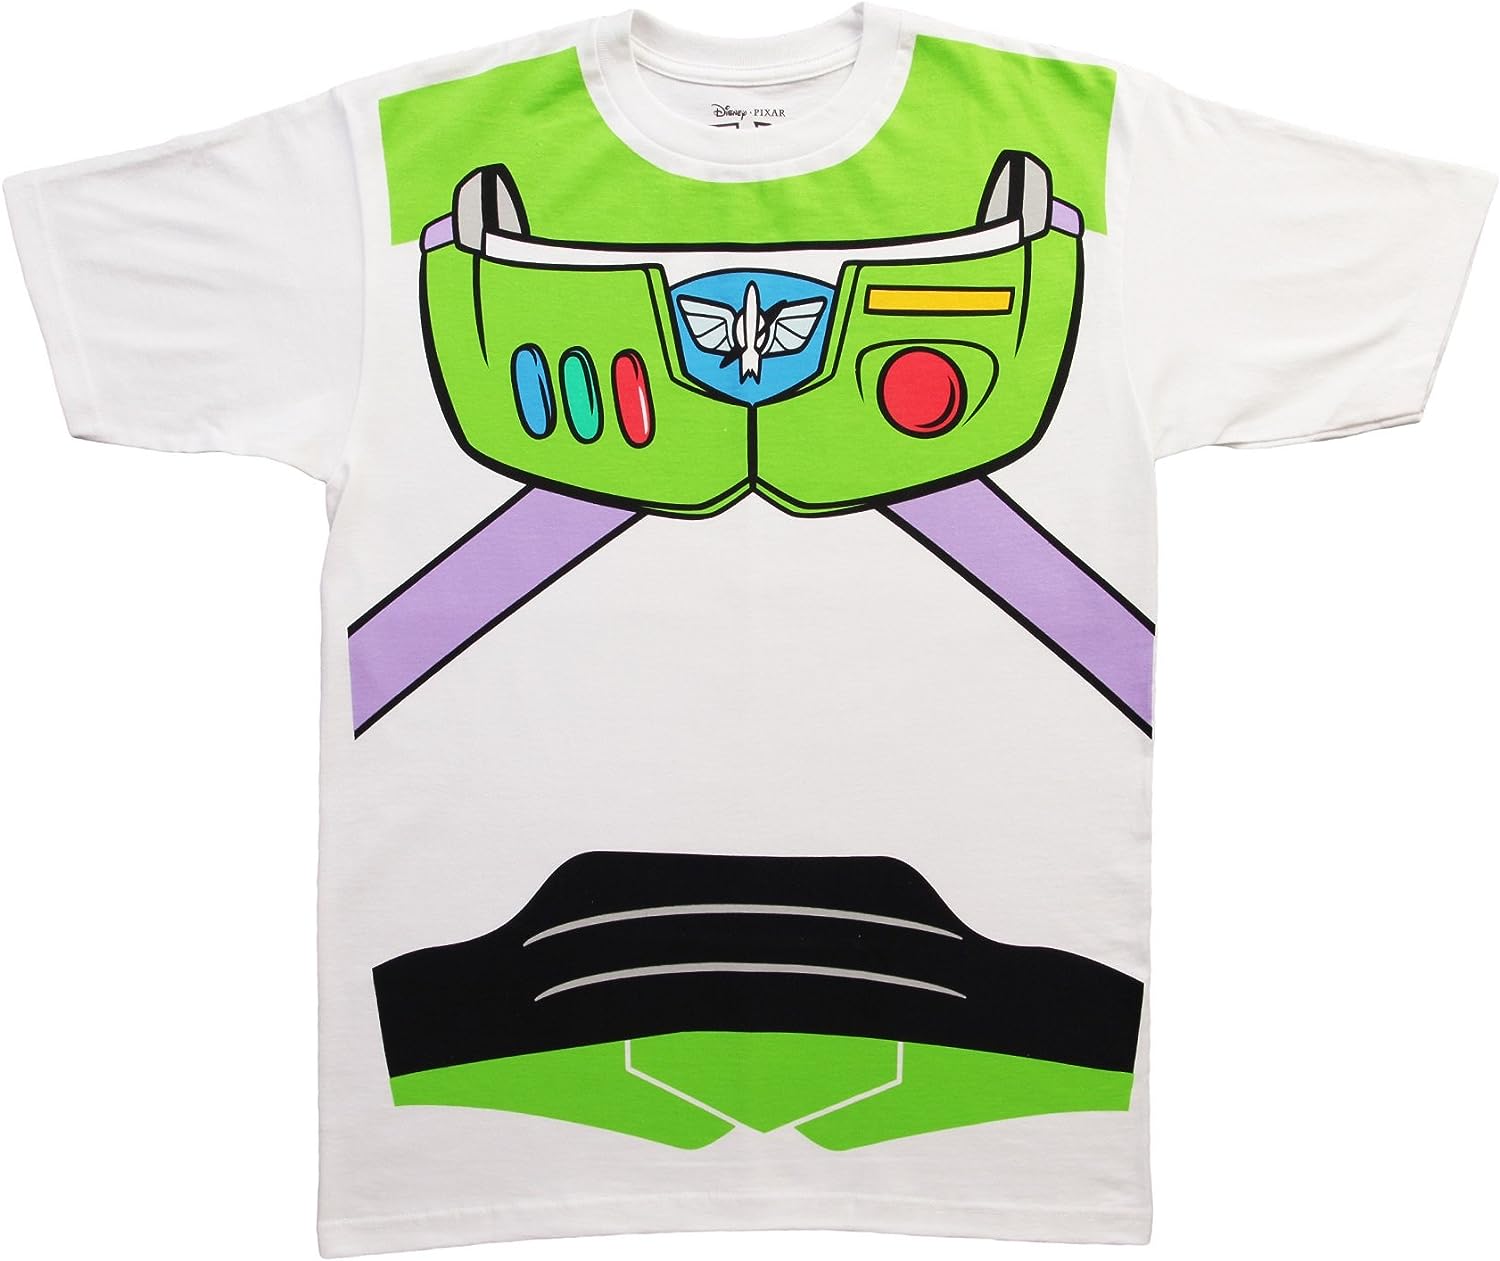 Toy Story Buzz Lightyear Astronaut Costume White Adult T-Shirt Tee Small